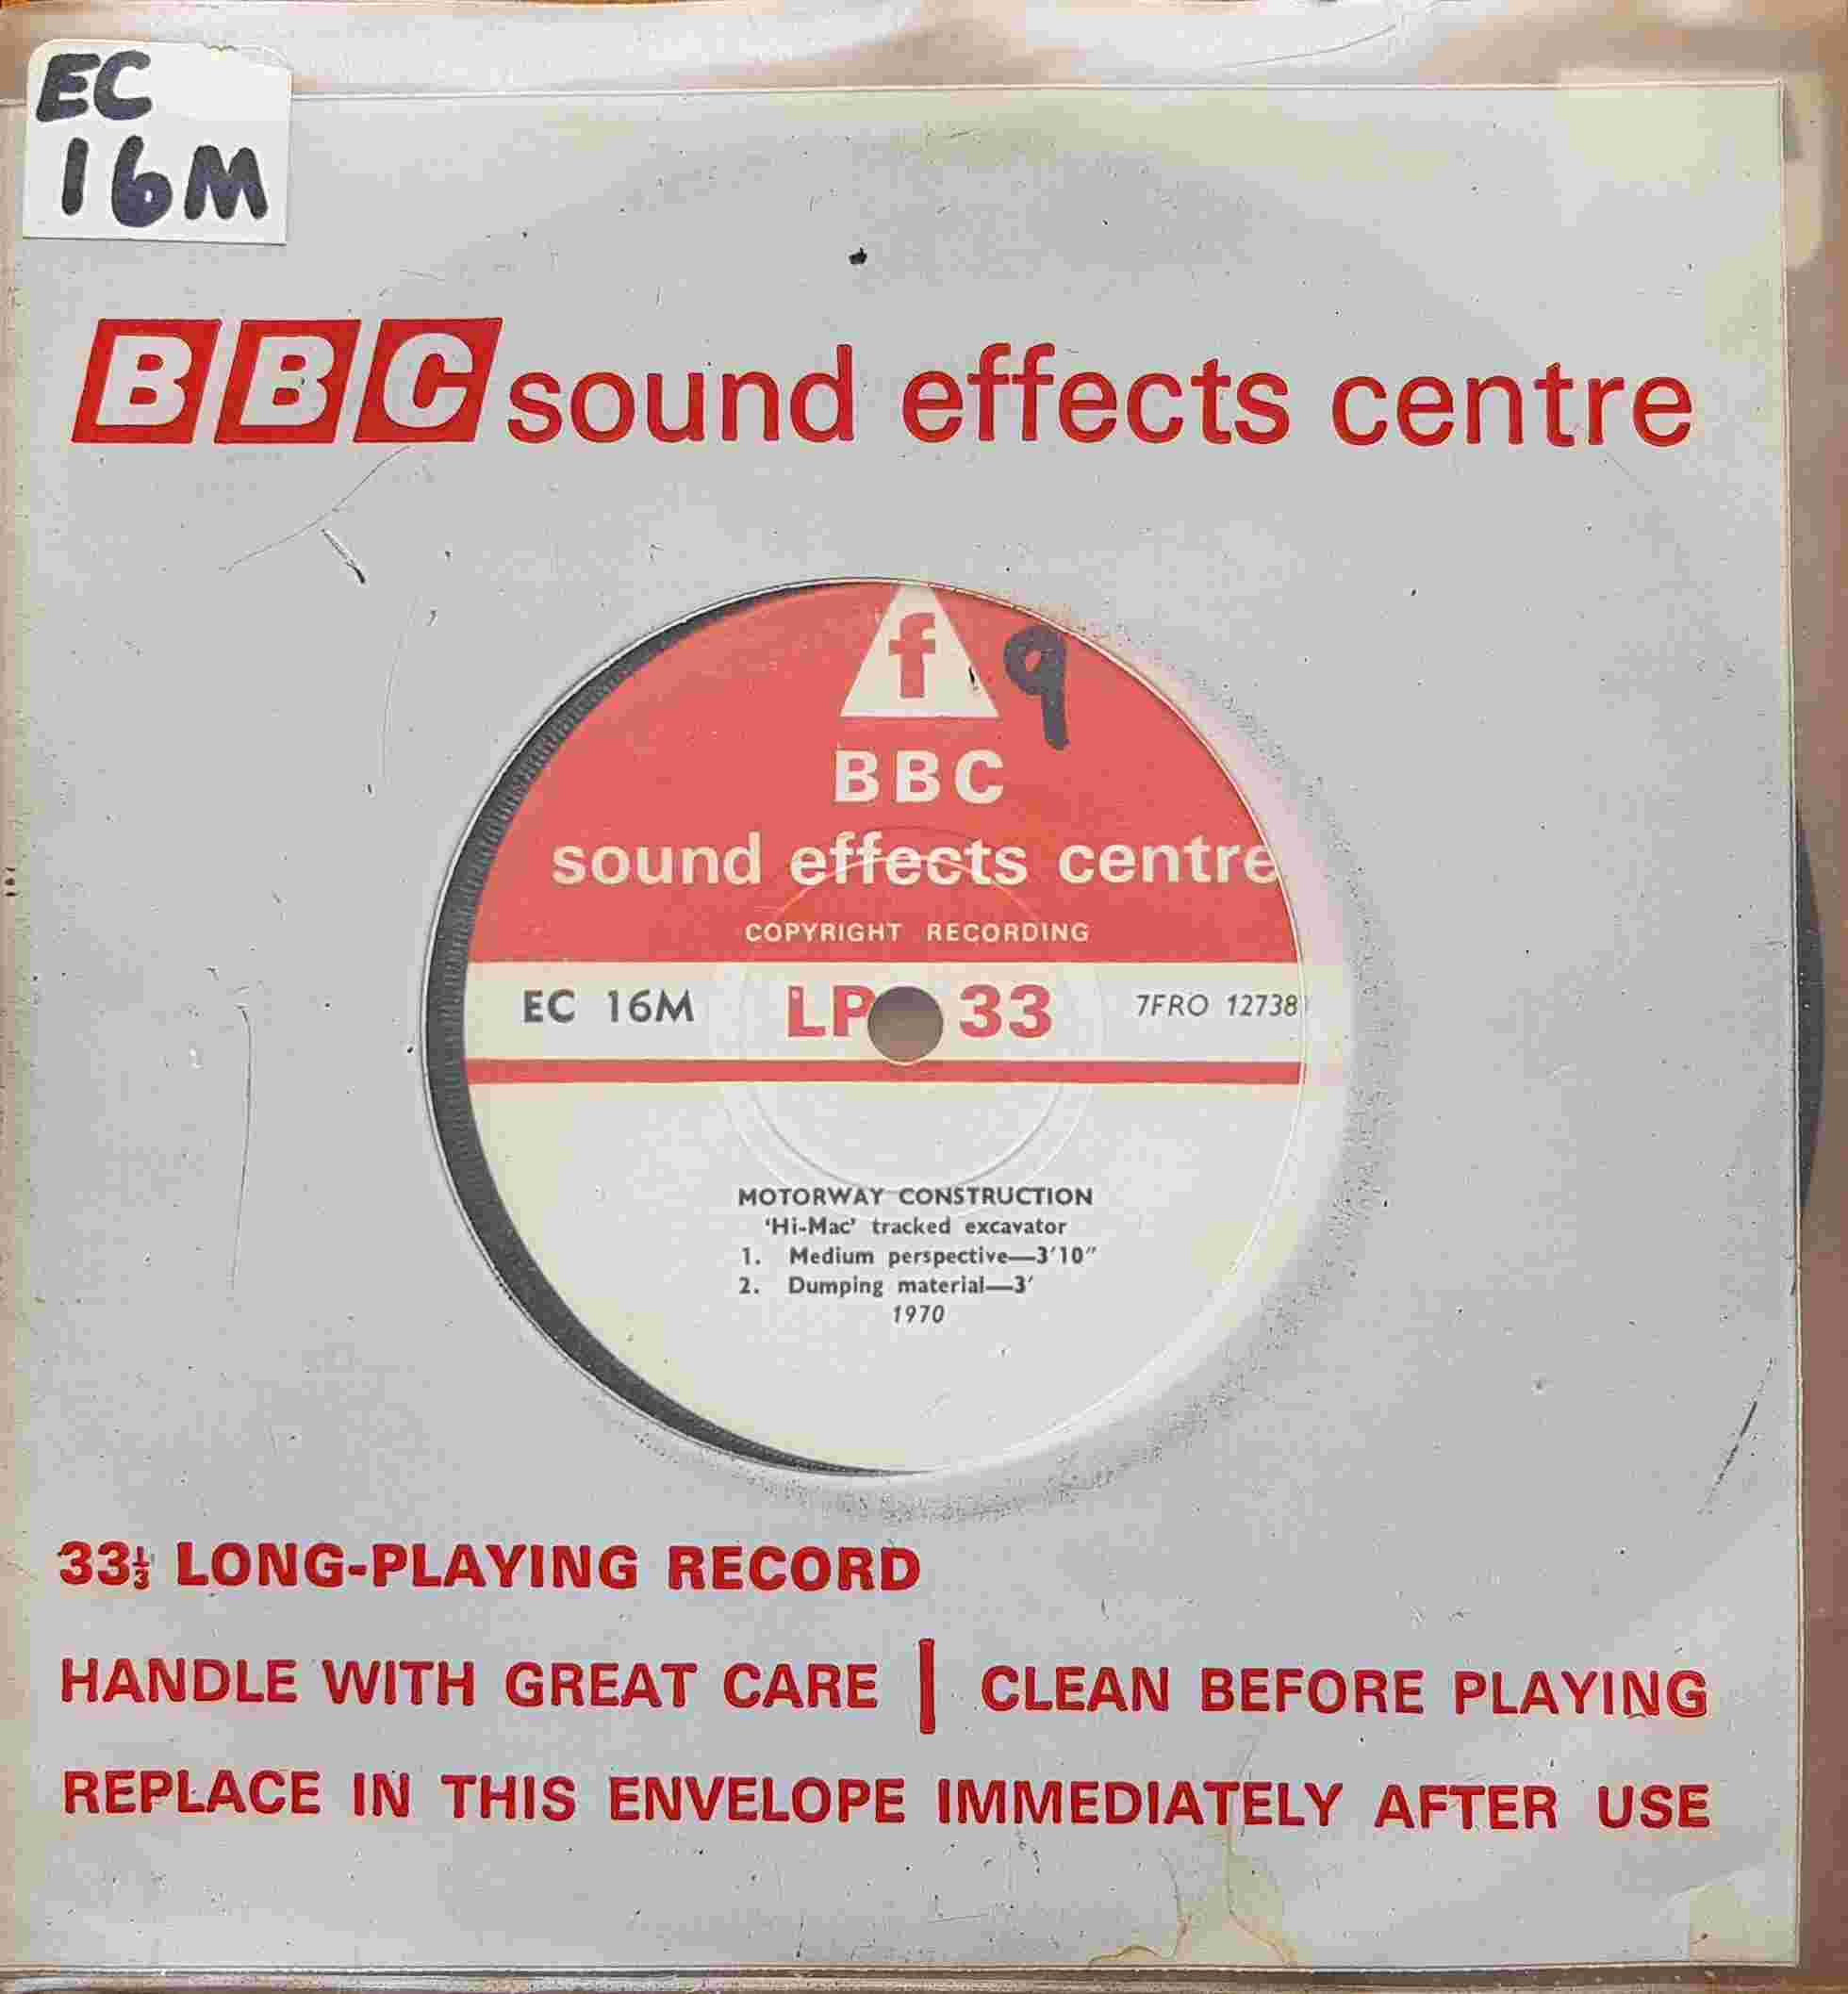 Picture of EC 16M Motorway construction single by artist Not registered from the BBC records and Tapes library